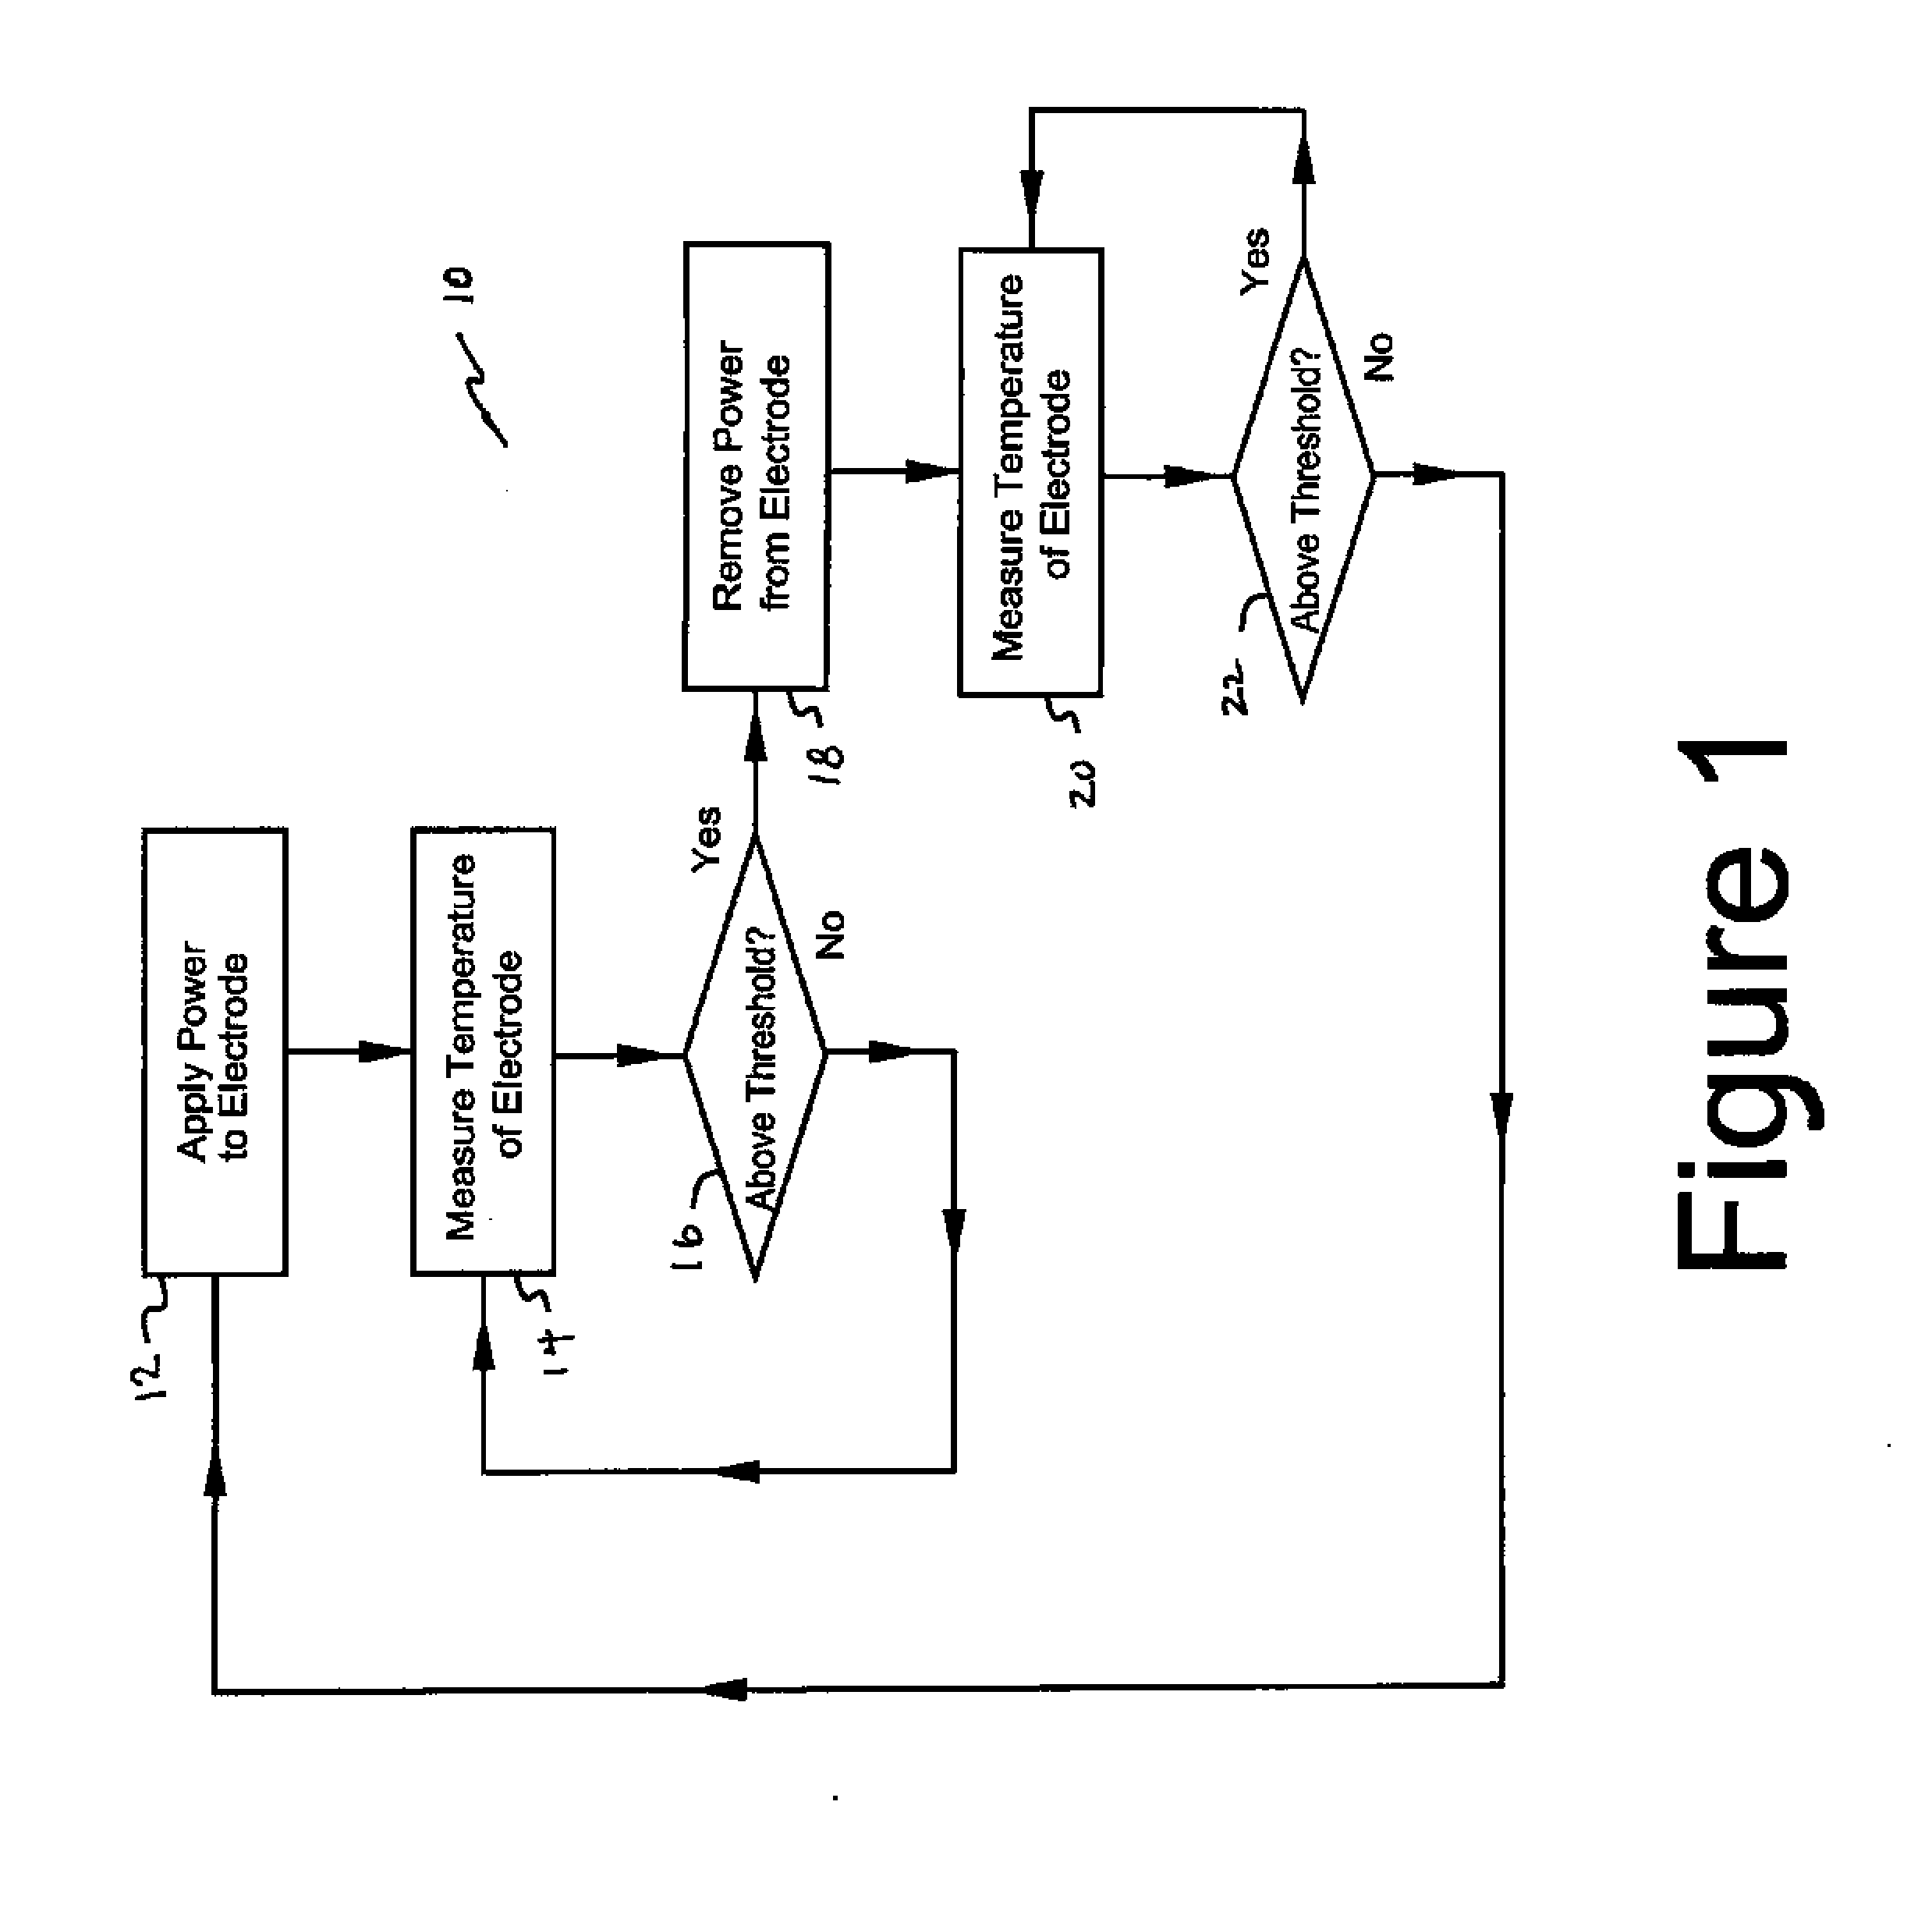 Temperature responsive ablation RF driving for moderating return electrode temperature